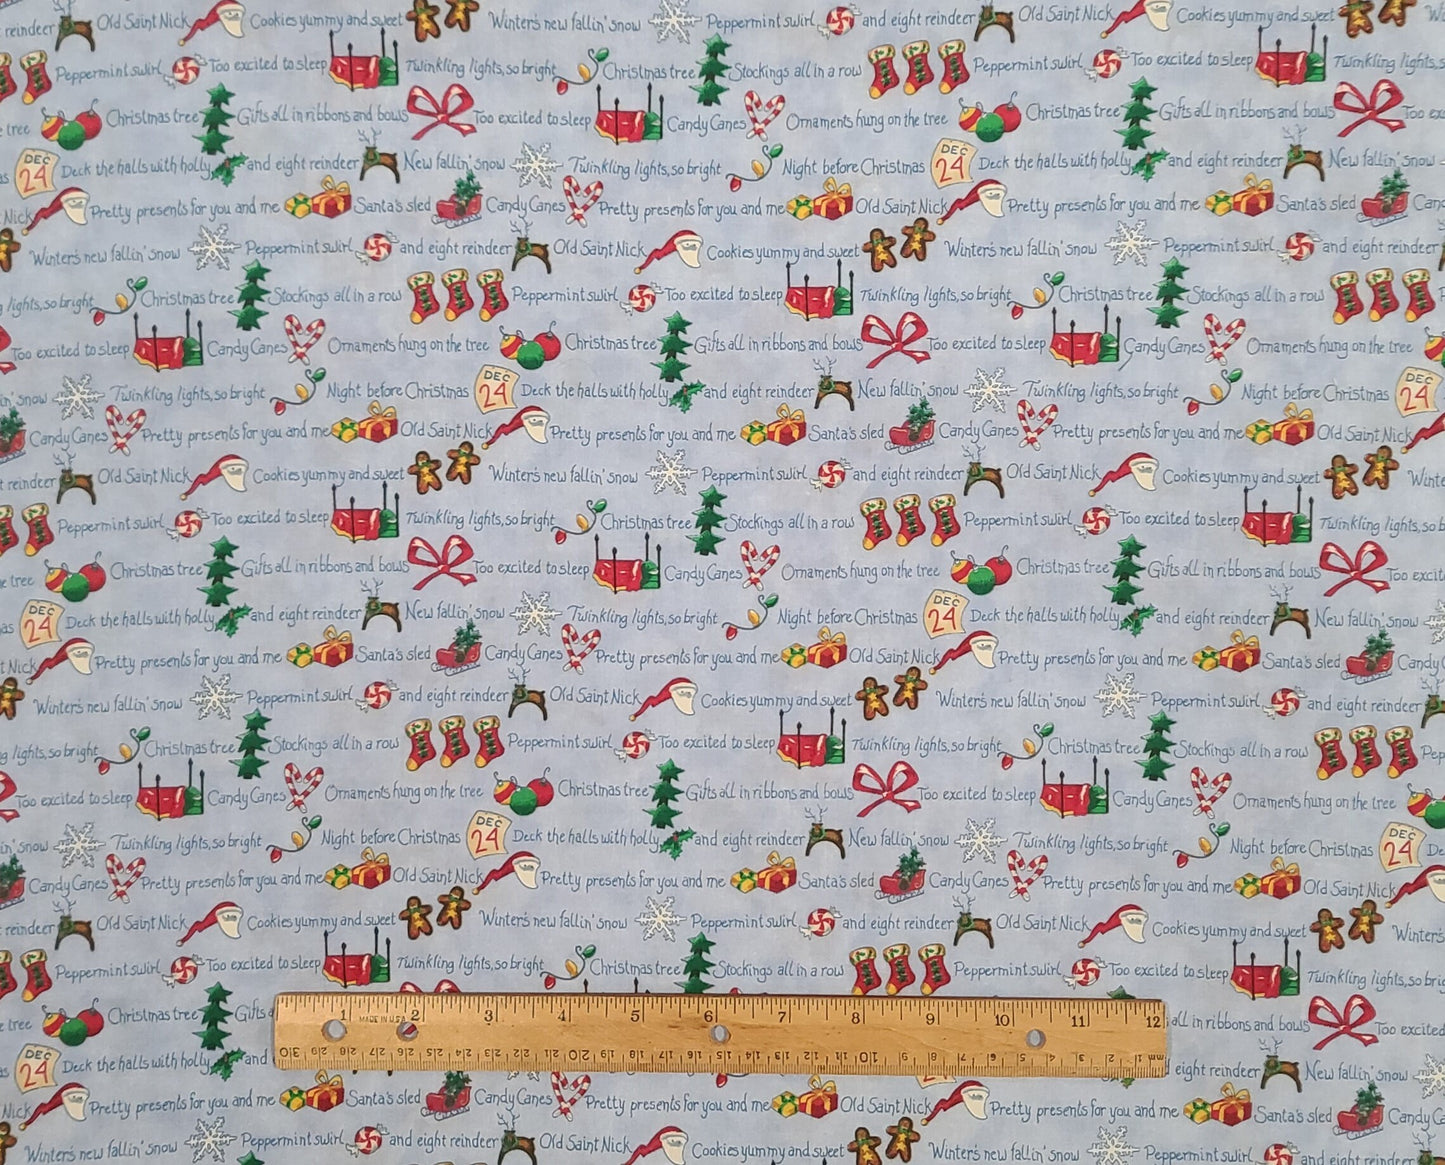 Leslie Beck for VIP Cranston Print Works - Light Blue Tonal Fabric / Various Christmas Sentiments (Selvage to Selvage) with Related Pictures